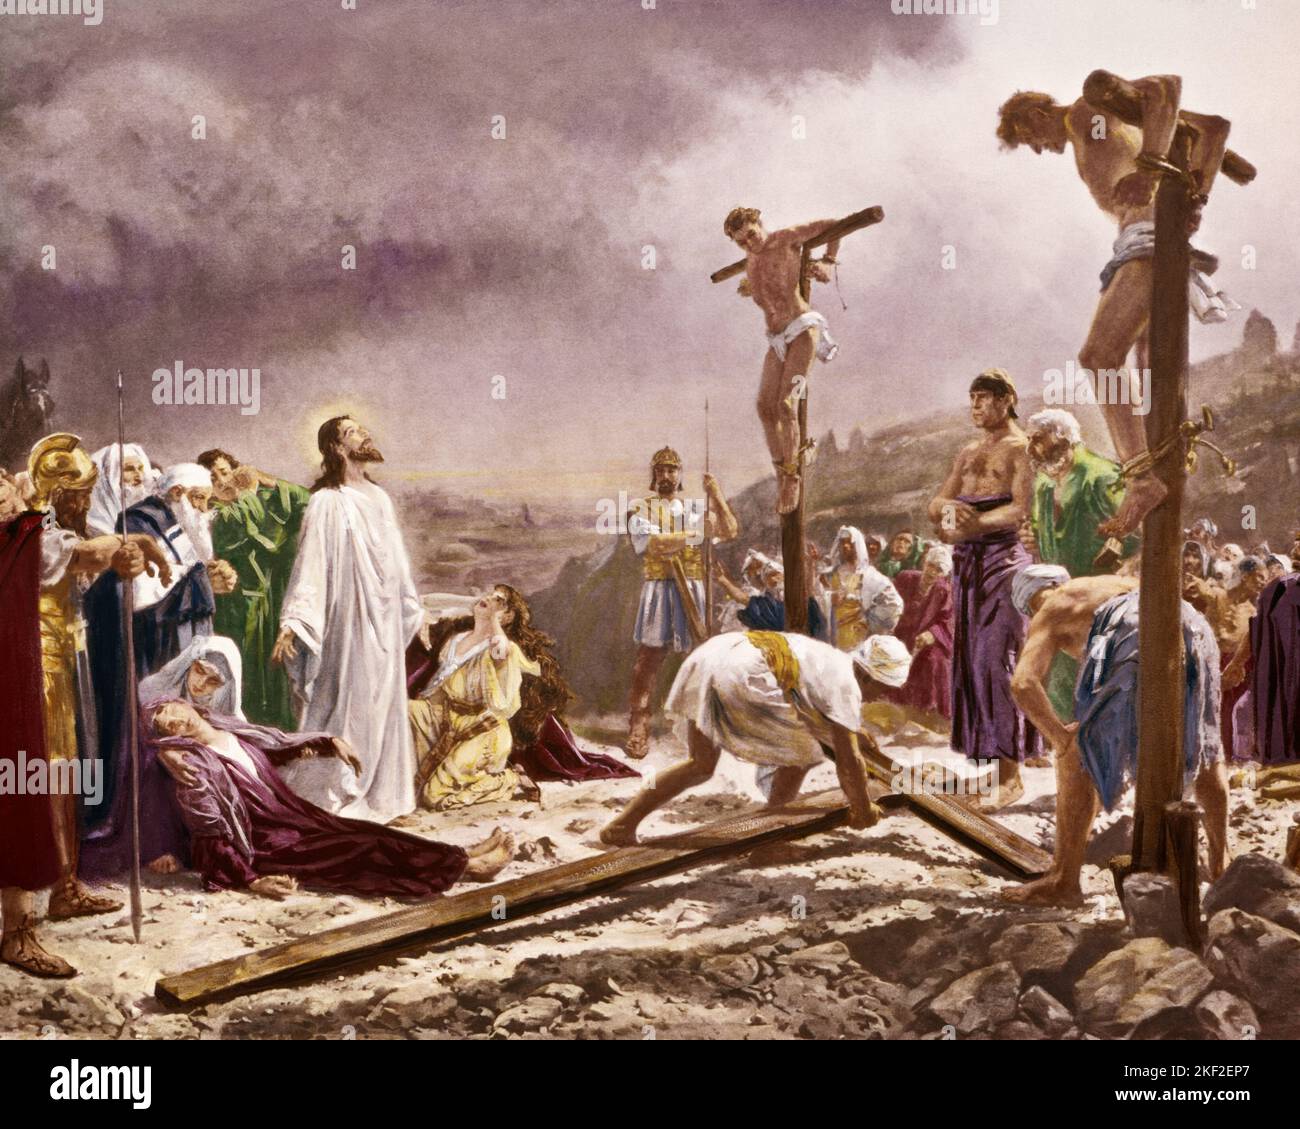 1960s 33 AD CHRIST ON CALVARY SPEAKS TO TWO CONVICTED THIEVES BEFORE HIS CRUCIFIXION RELIGIOUS PAINTING BY CLEMENTS - kr8312 SPL001 HARS OF AUTHORITY CALVARY CRUCIFIXION CONCEPTUAL SON OF GOD FAITHFUL SPEAKS 33 AD COOPERATION FAITH IDEAS MESSIAH SPIRITUAL THIEVES TOGETHERNESS BELIEF INSPIRATIONAL JESUS CHRIST OLD FASHIONED Stock Photo